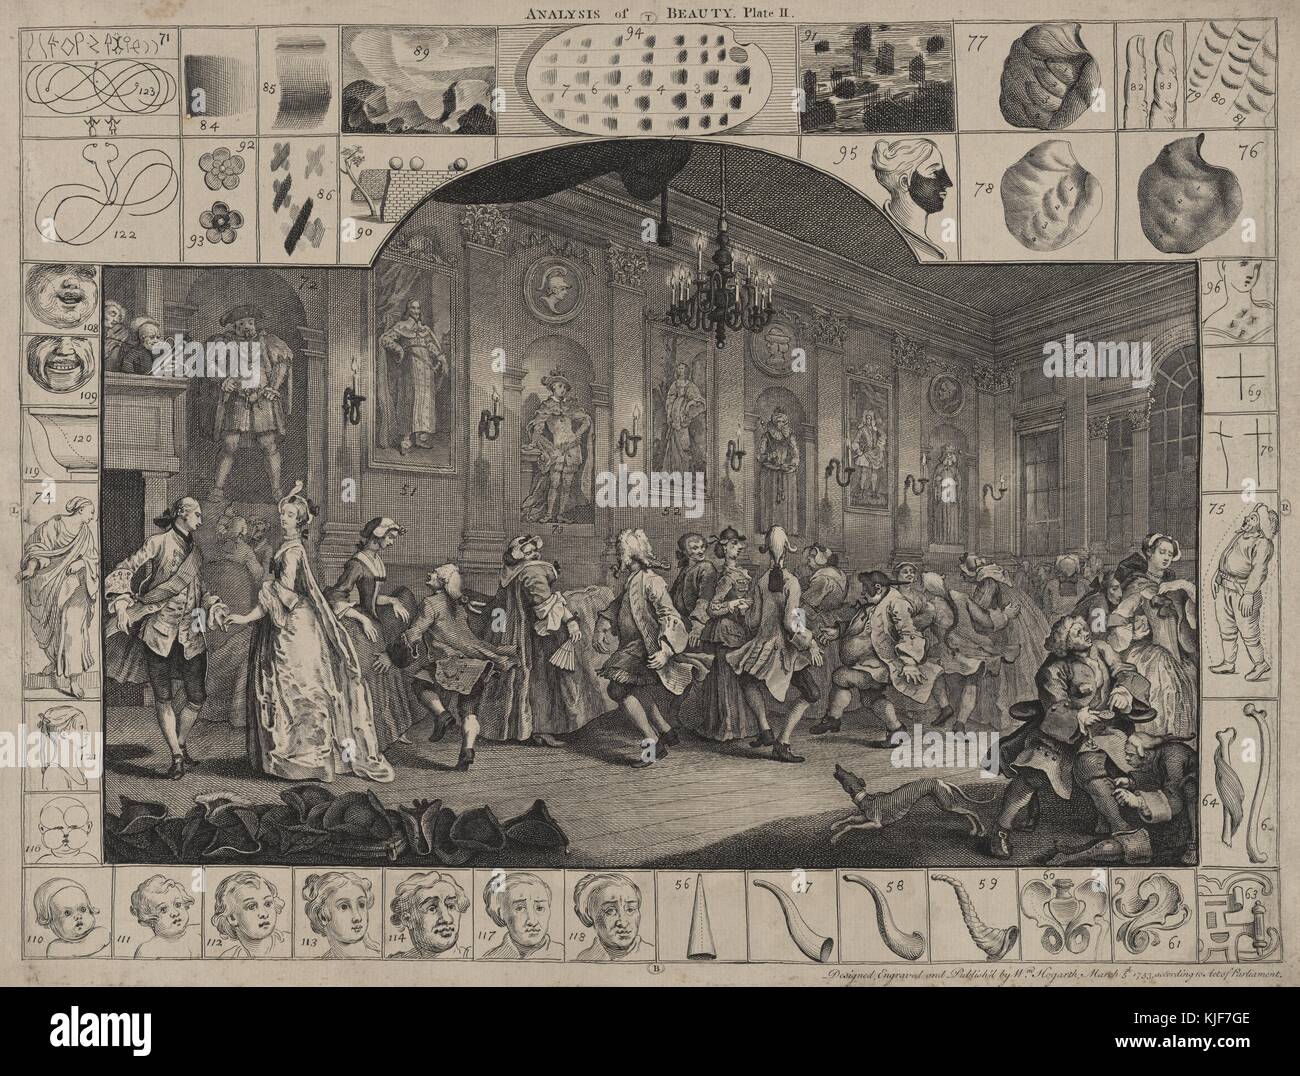 Engraving on Paper, titled 'The Analysis of Beauty, Plate II', depicting a large group of men and women in a room dancing, different drawings of faces, horns, bones, bodies, along the edge of the engraving, by William Hogarth, 1753. From the New York Public Library. Stock Photo